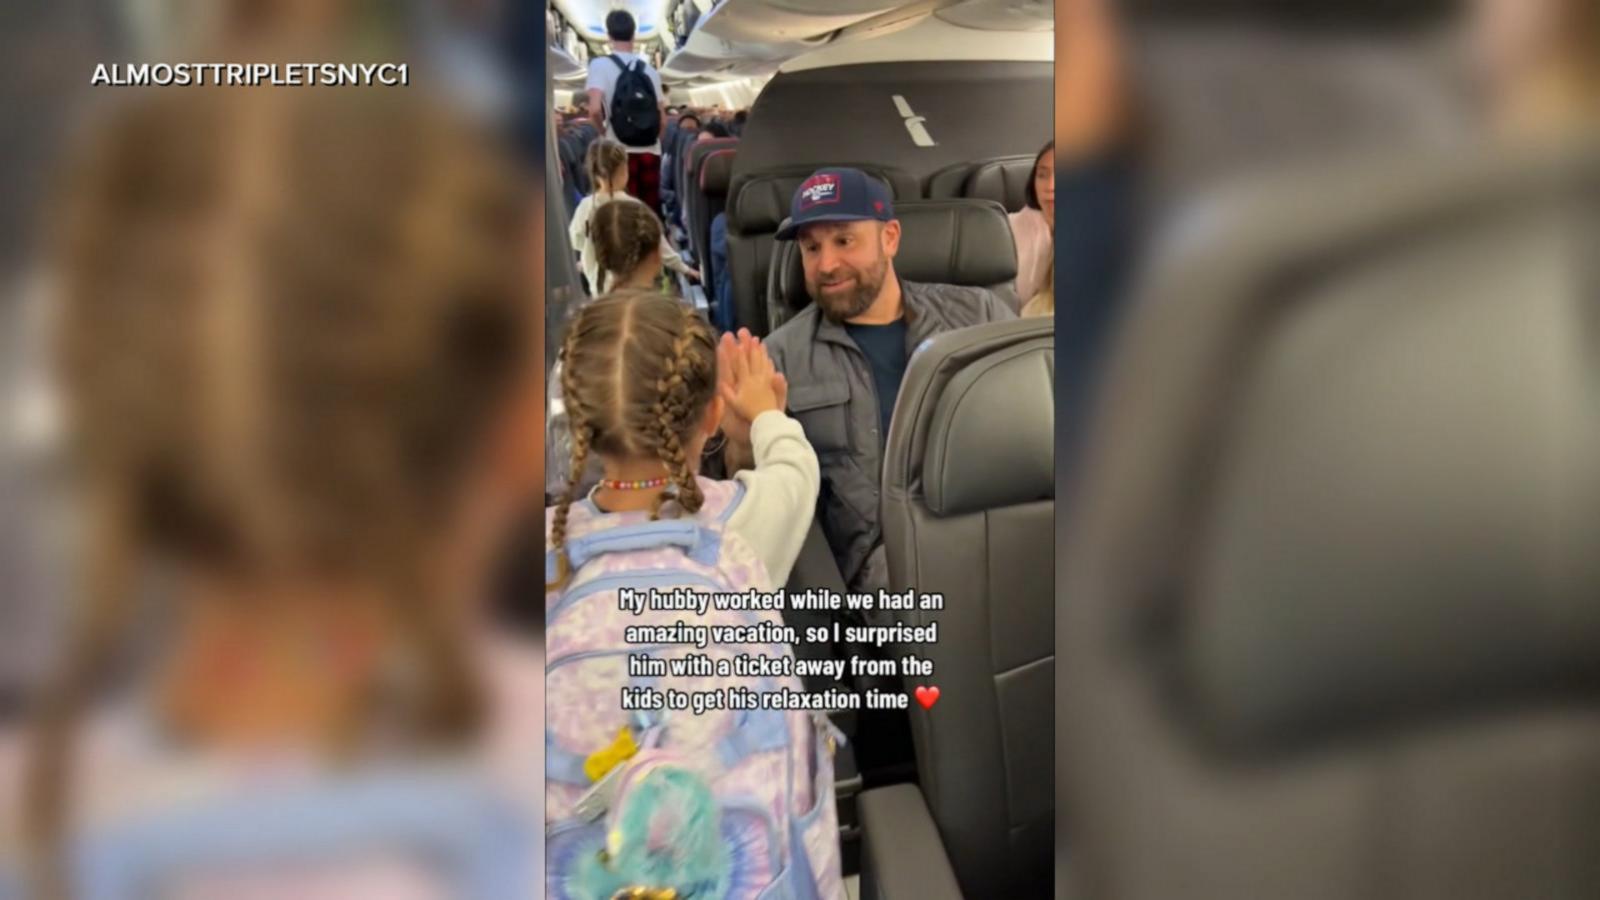 VIDEO: Mom surprises hardworking husband with upgraded plane ticket